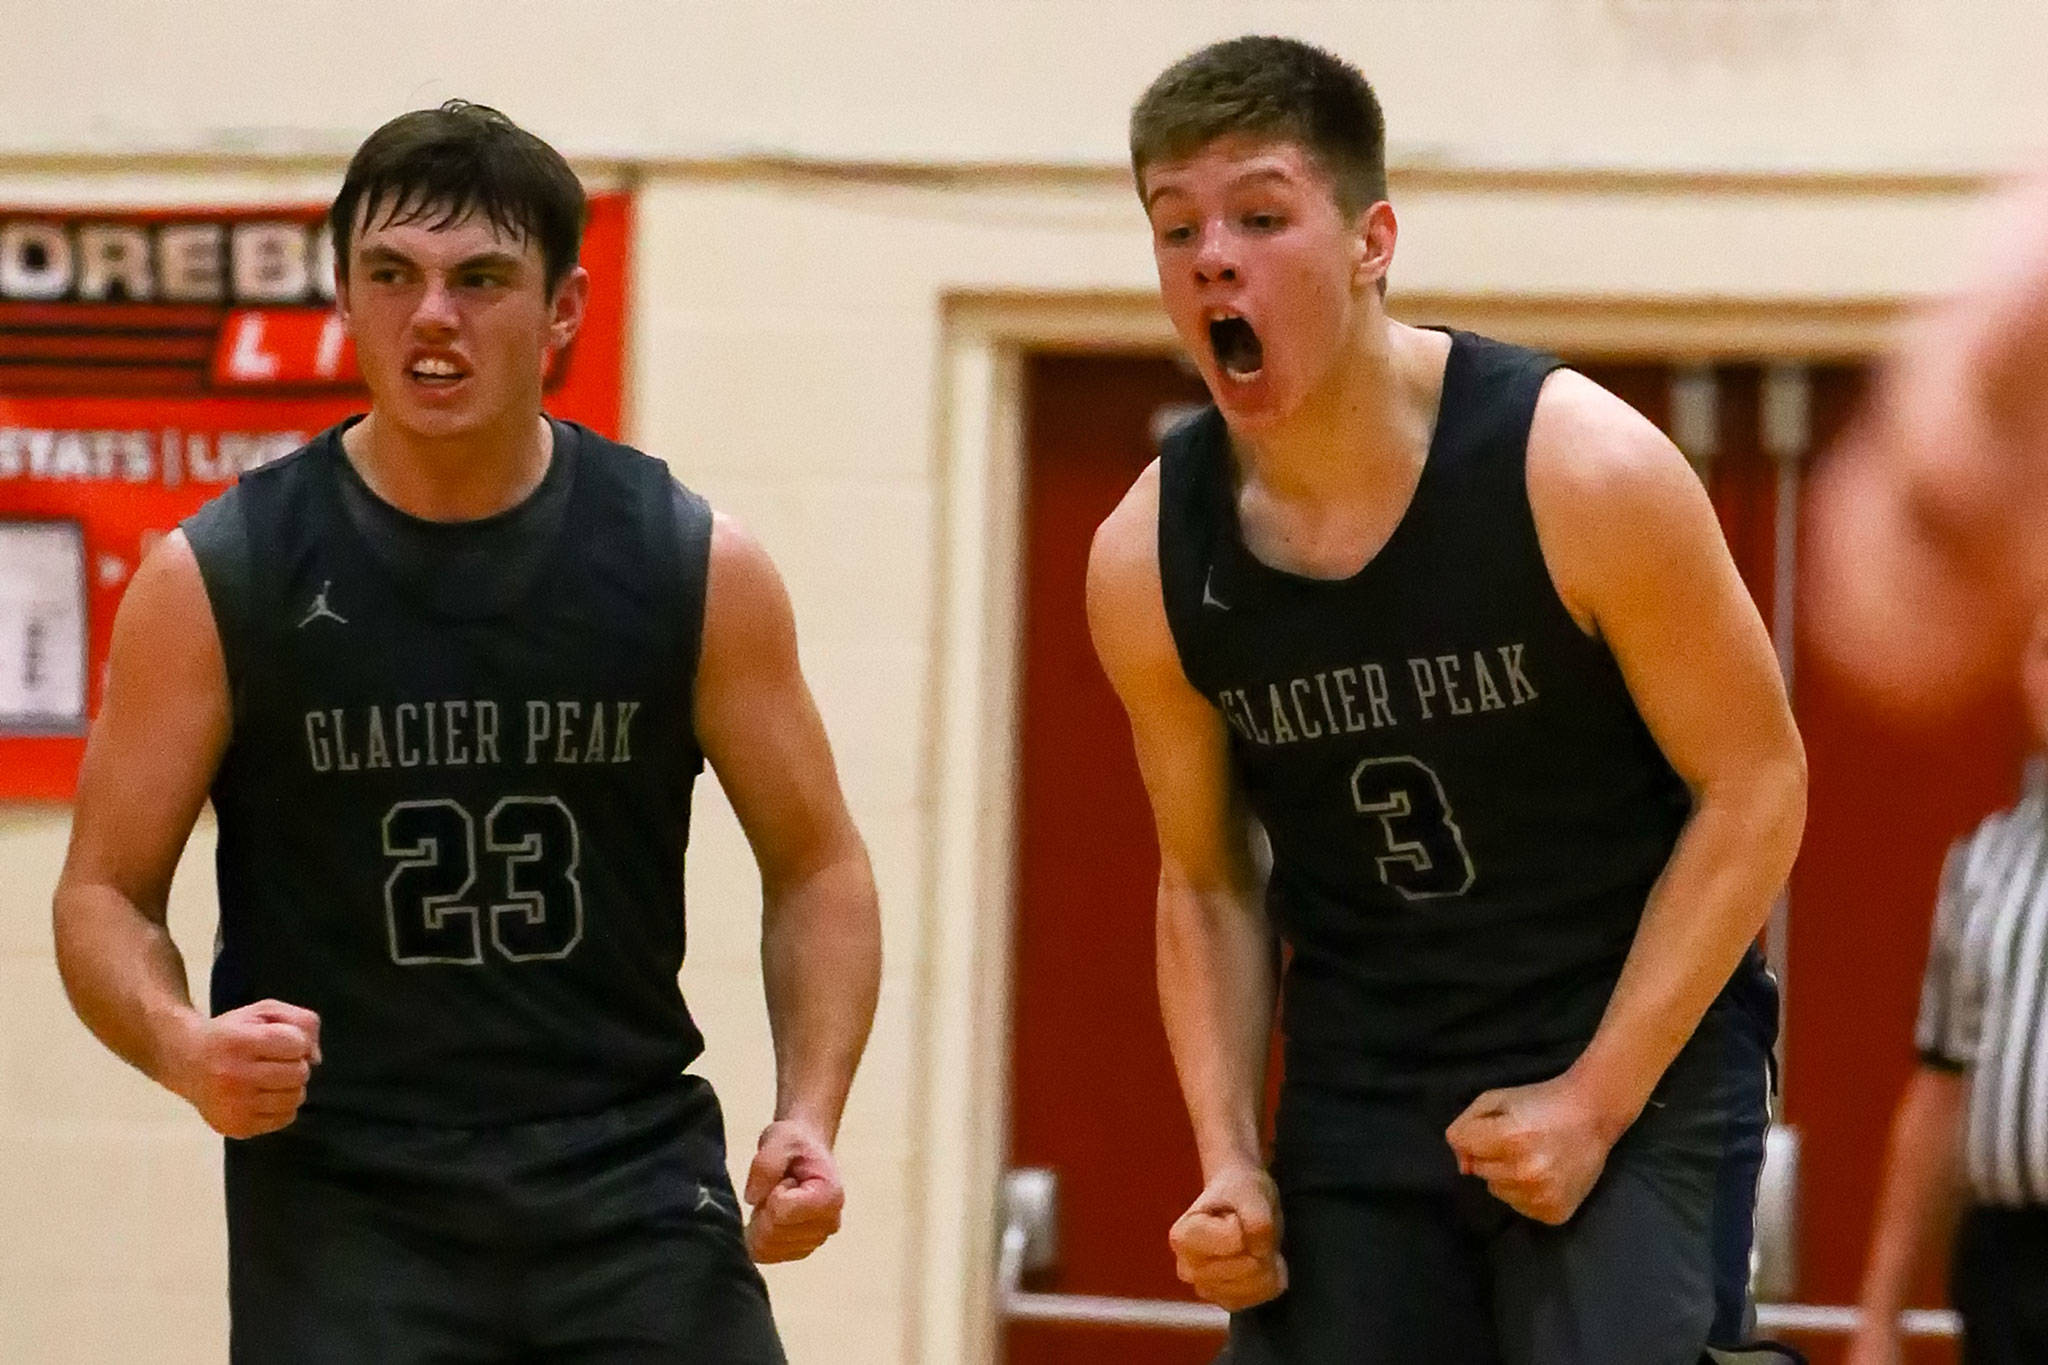 As of Monday afternoon, the Glacier Peak boys basketball team was ranked No. 1 in the state’s Class 4A RPI rankings. (Kevin Clark / The Herald)